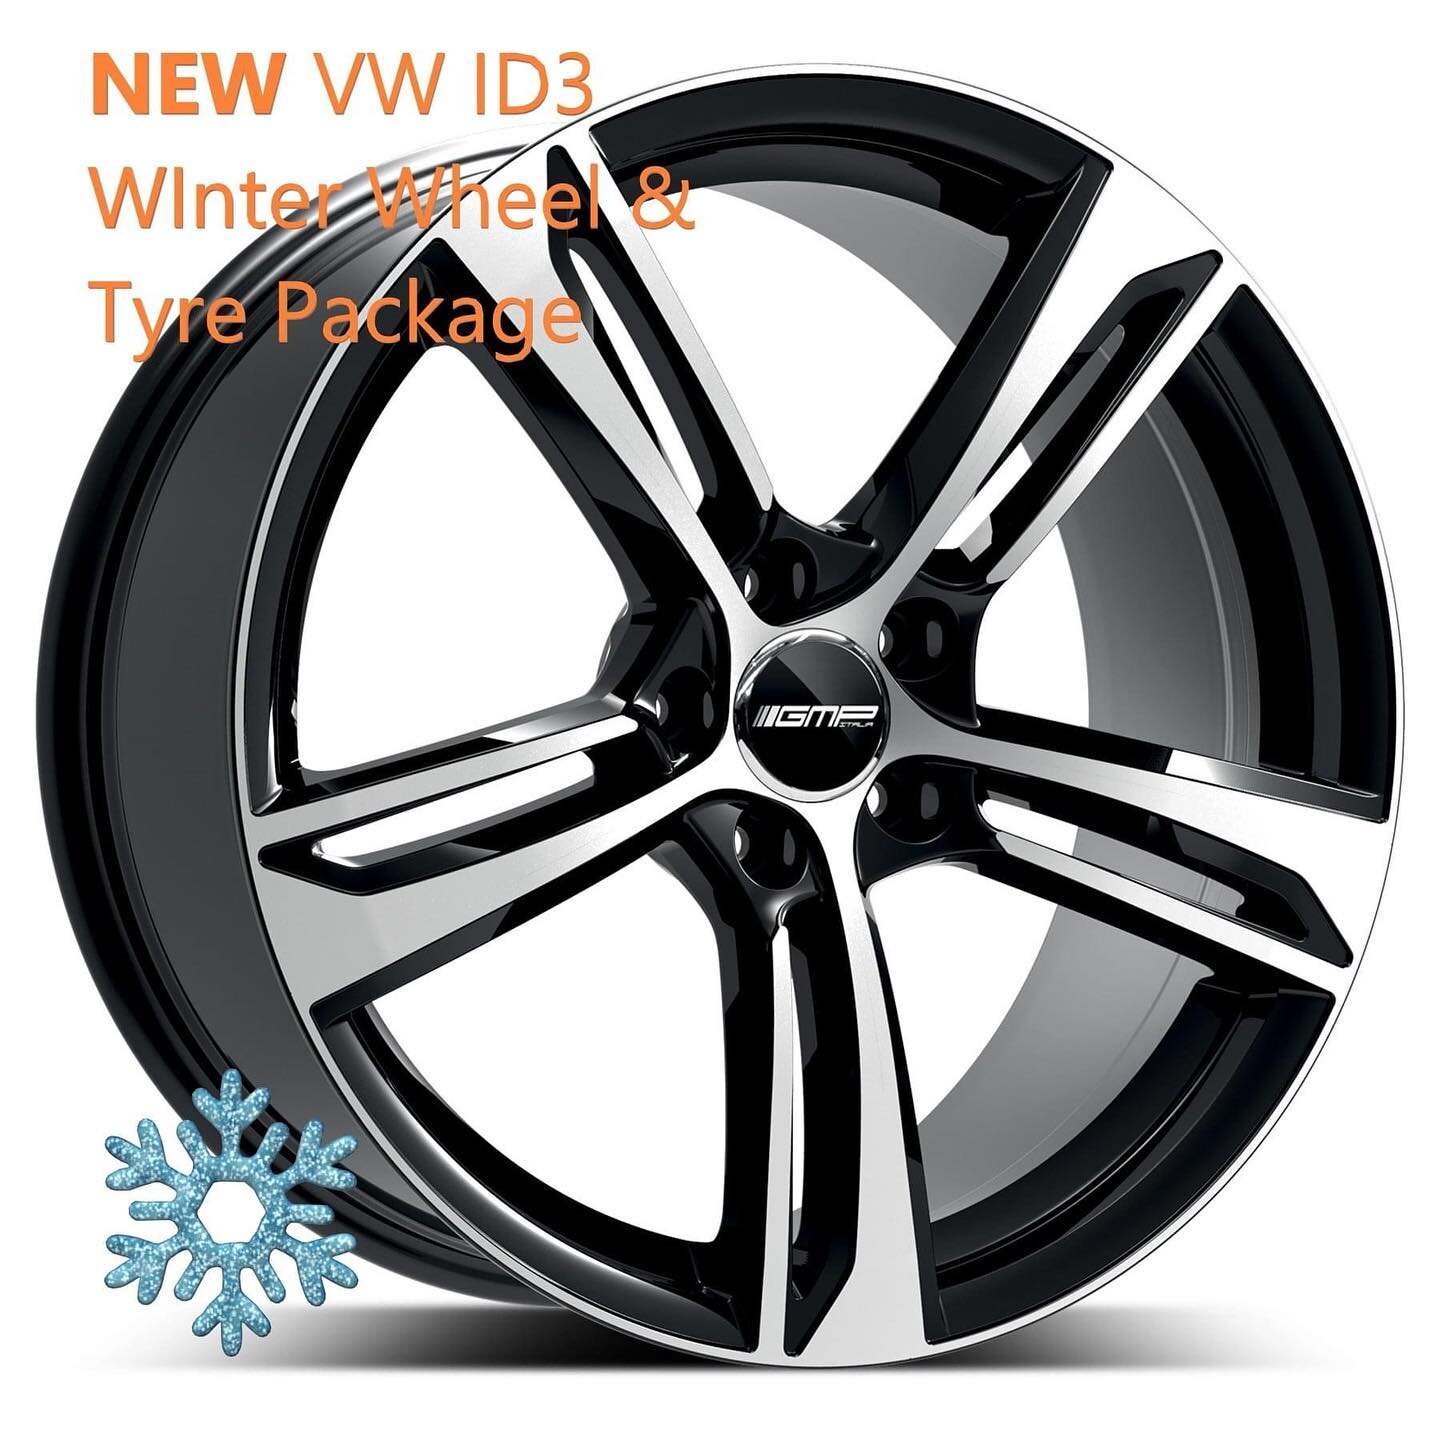 Introducing the UK's first Winter Wheel &amp; Tyre package specifically tailored to the VW ID3. This package includes a set of GMP Alloy Wheels, the Pak in Black/Polished or the Arcan in Silver/Polished, both in the stock ID3 7.5x18&quot; ET55 size. 